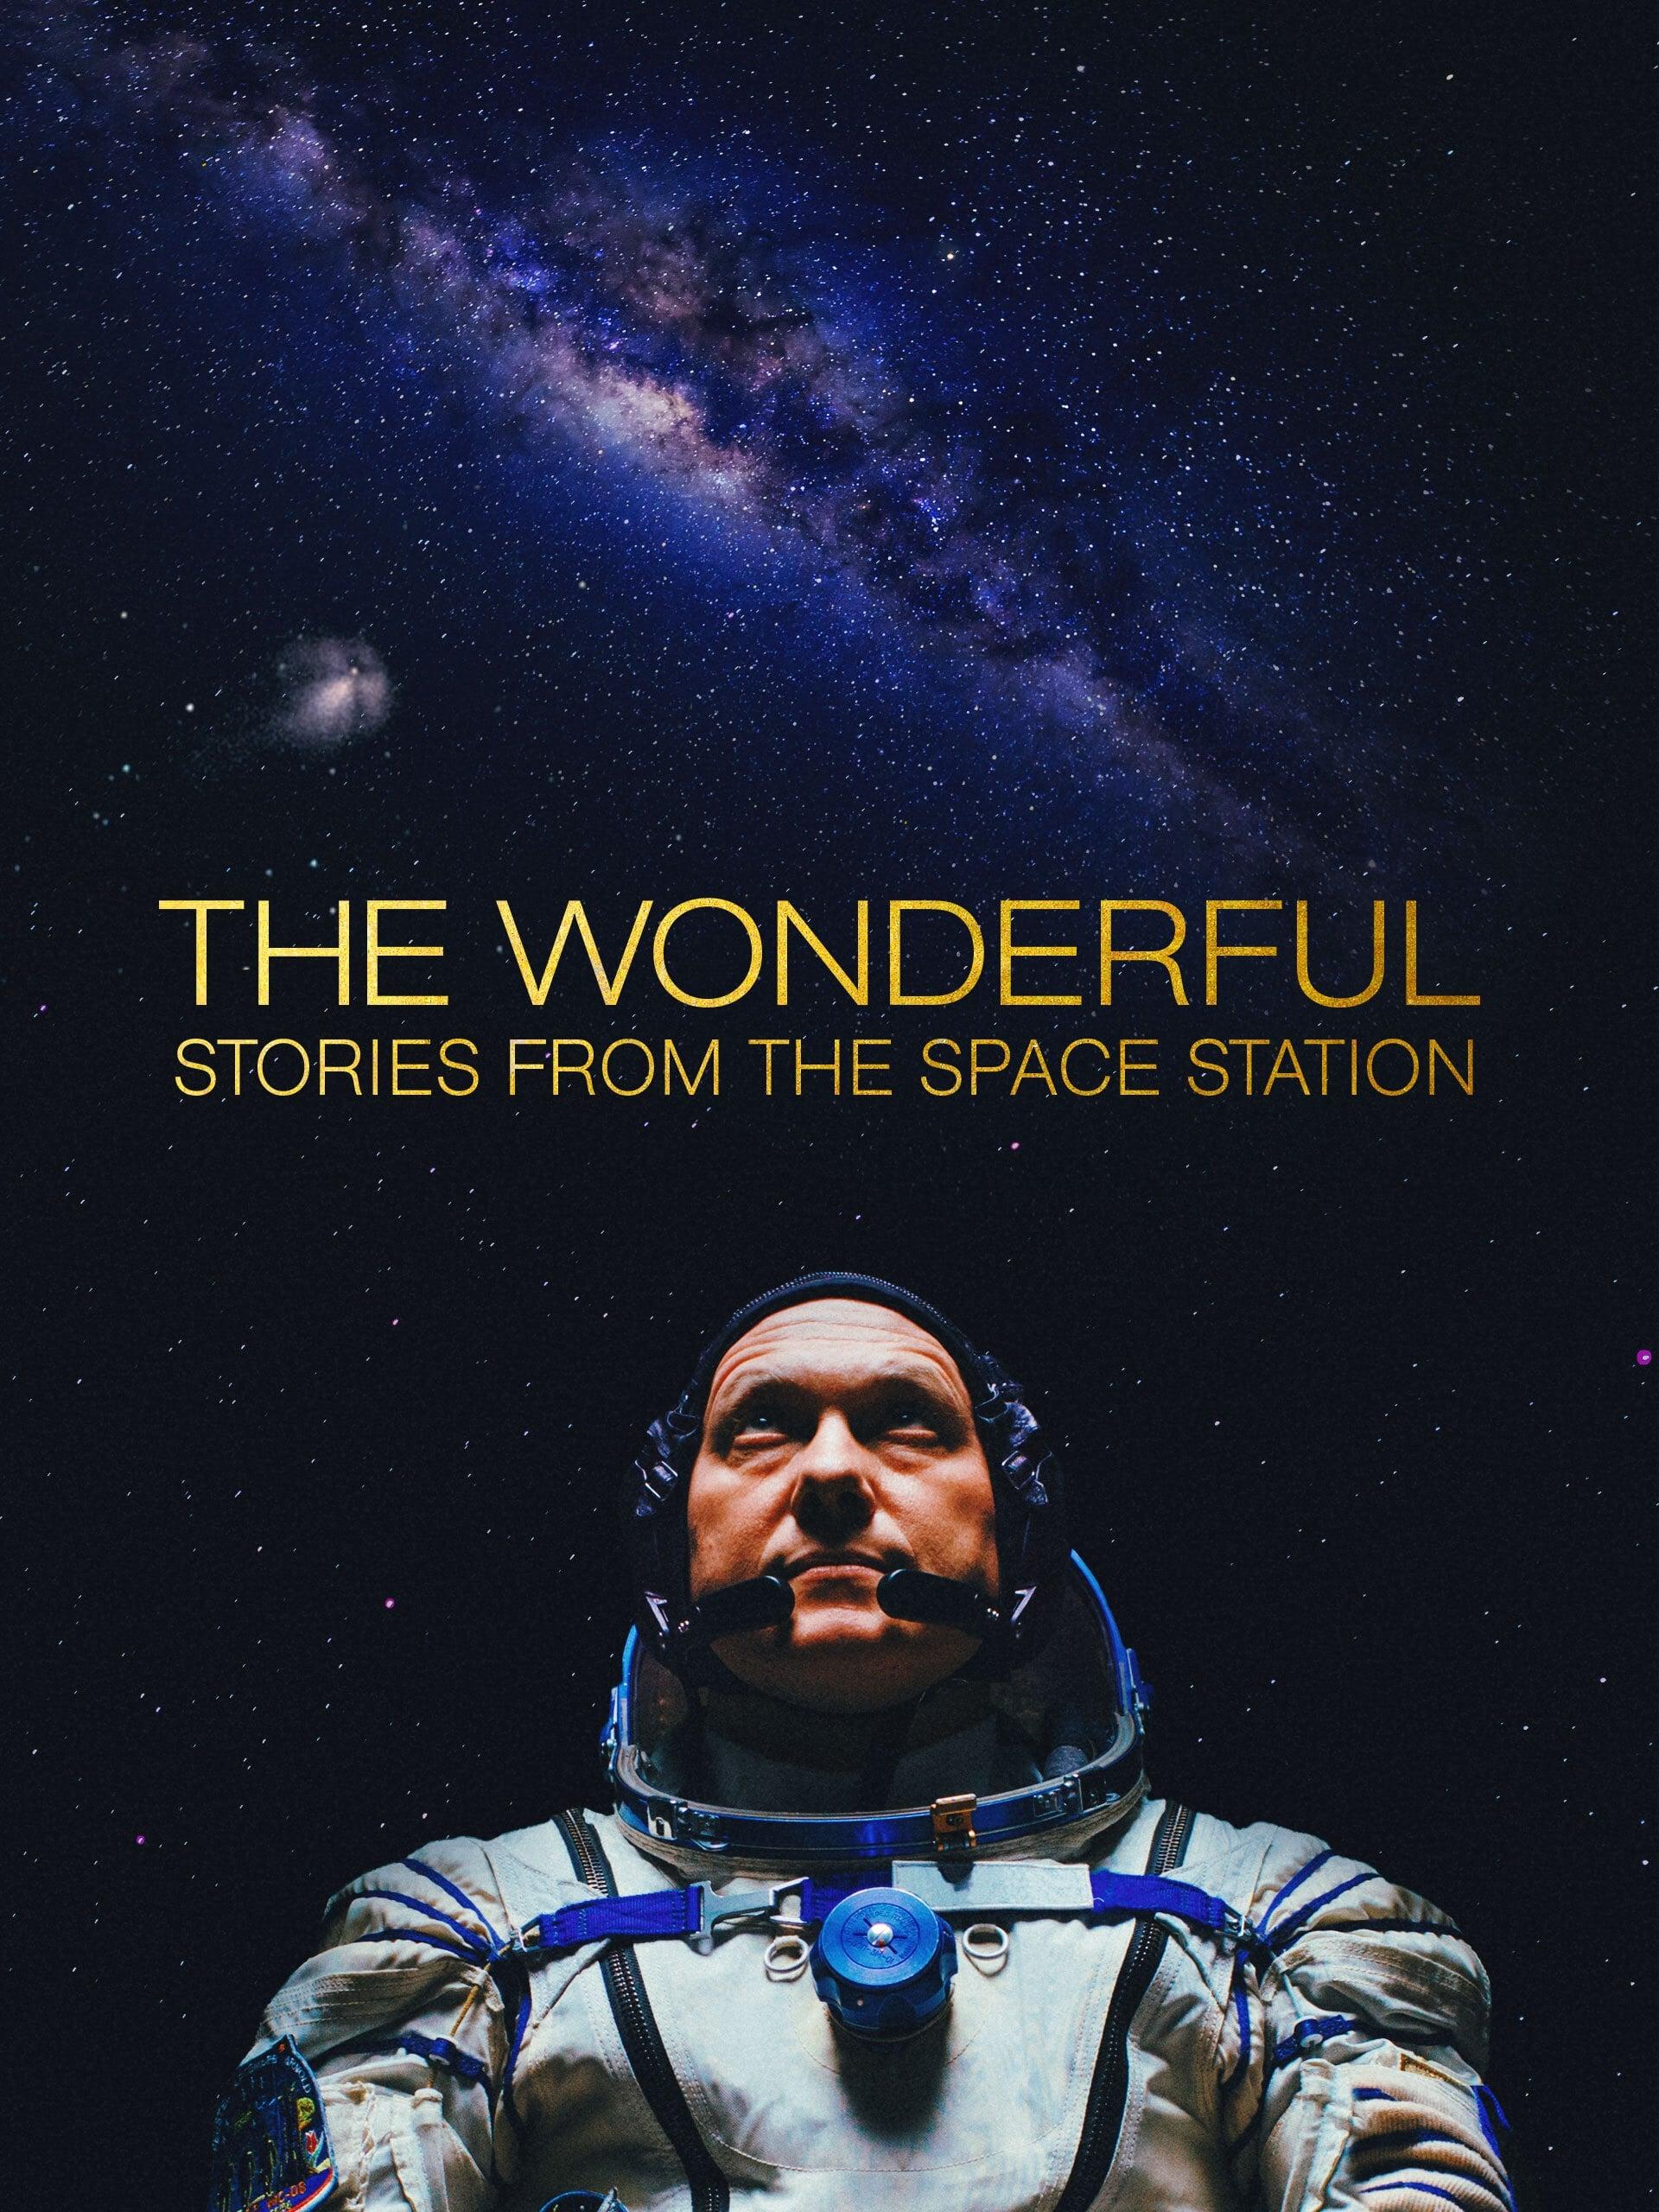 The Wonderful: Stories from the Space Station poster